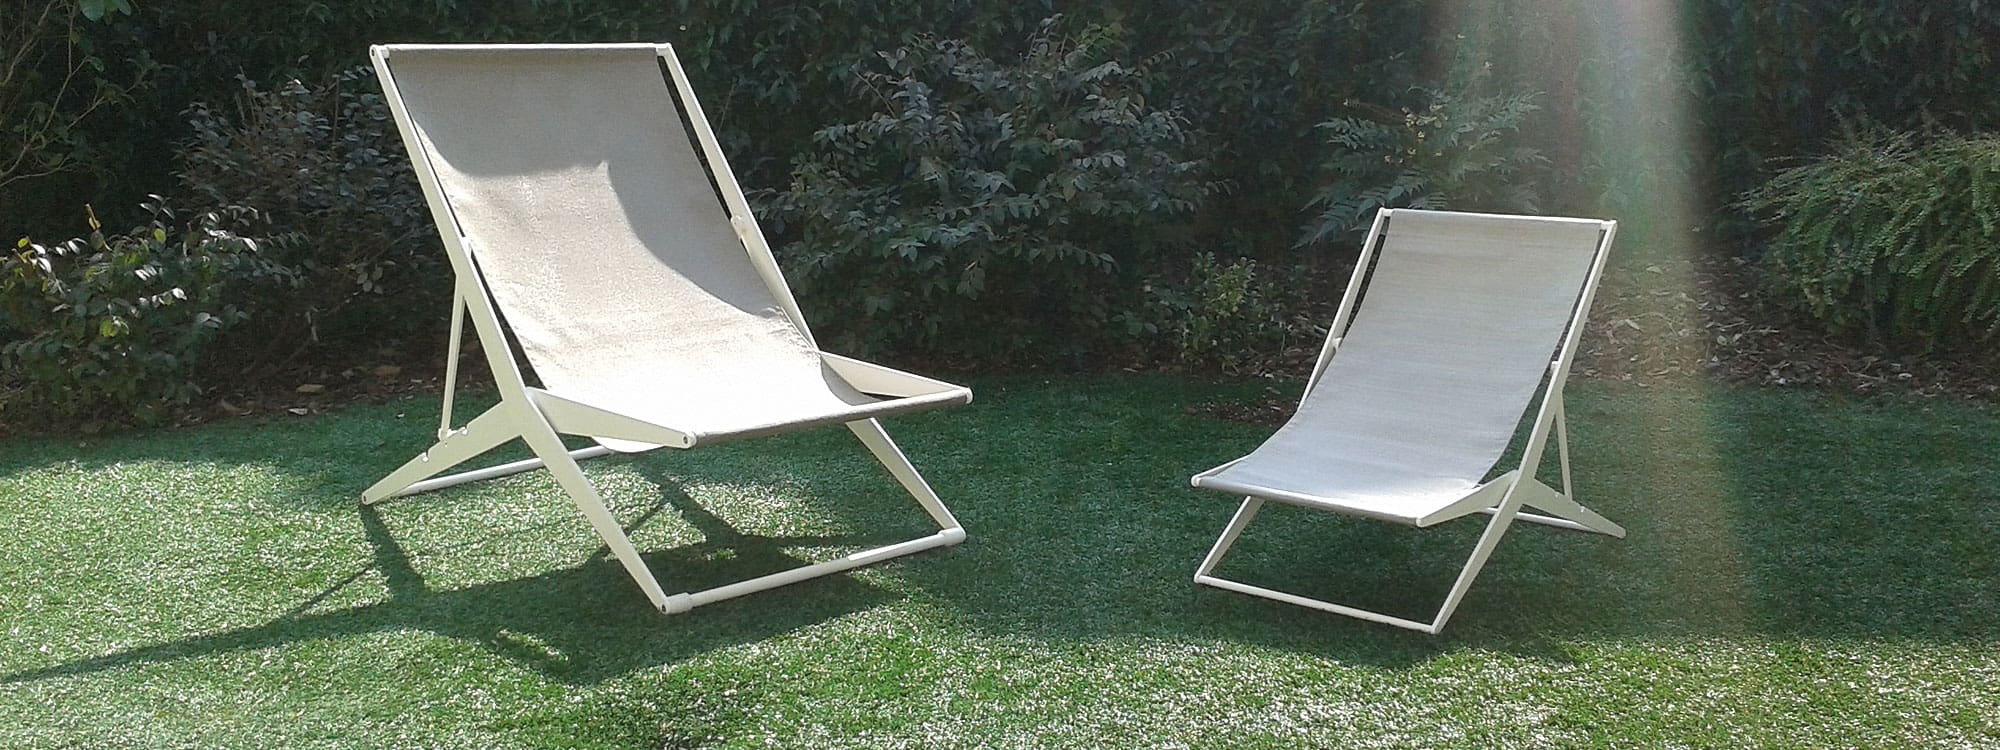 Image of pair of Boomy modern deck chairs with white stainless steel frames and white Batyline mesh slings by Coro, Italy